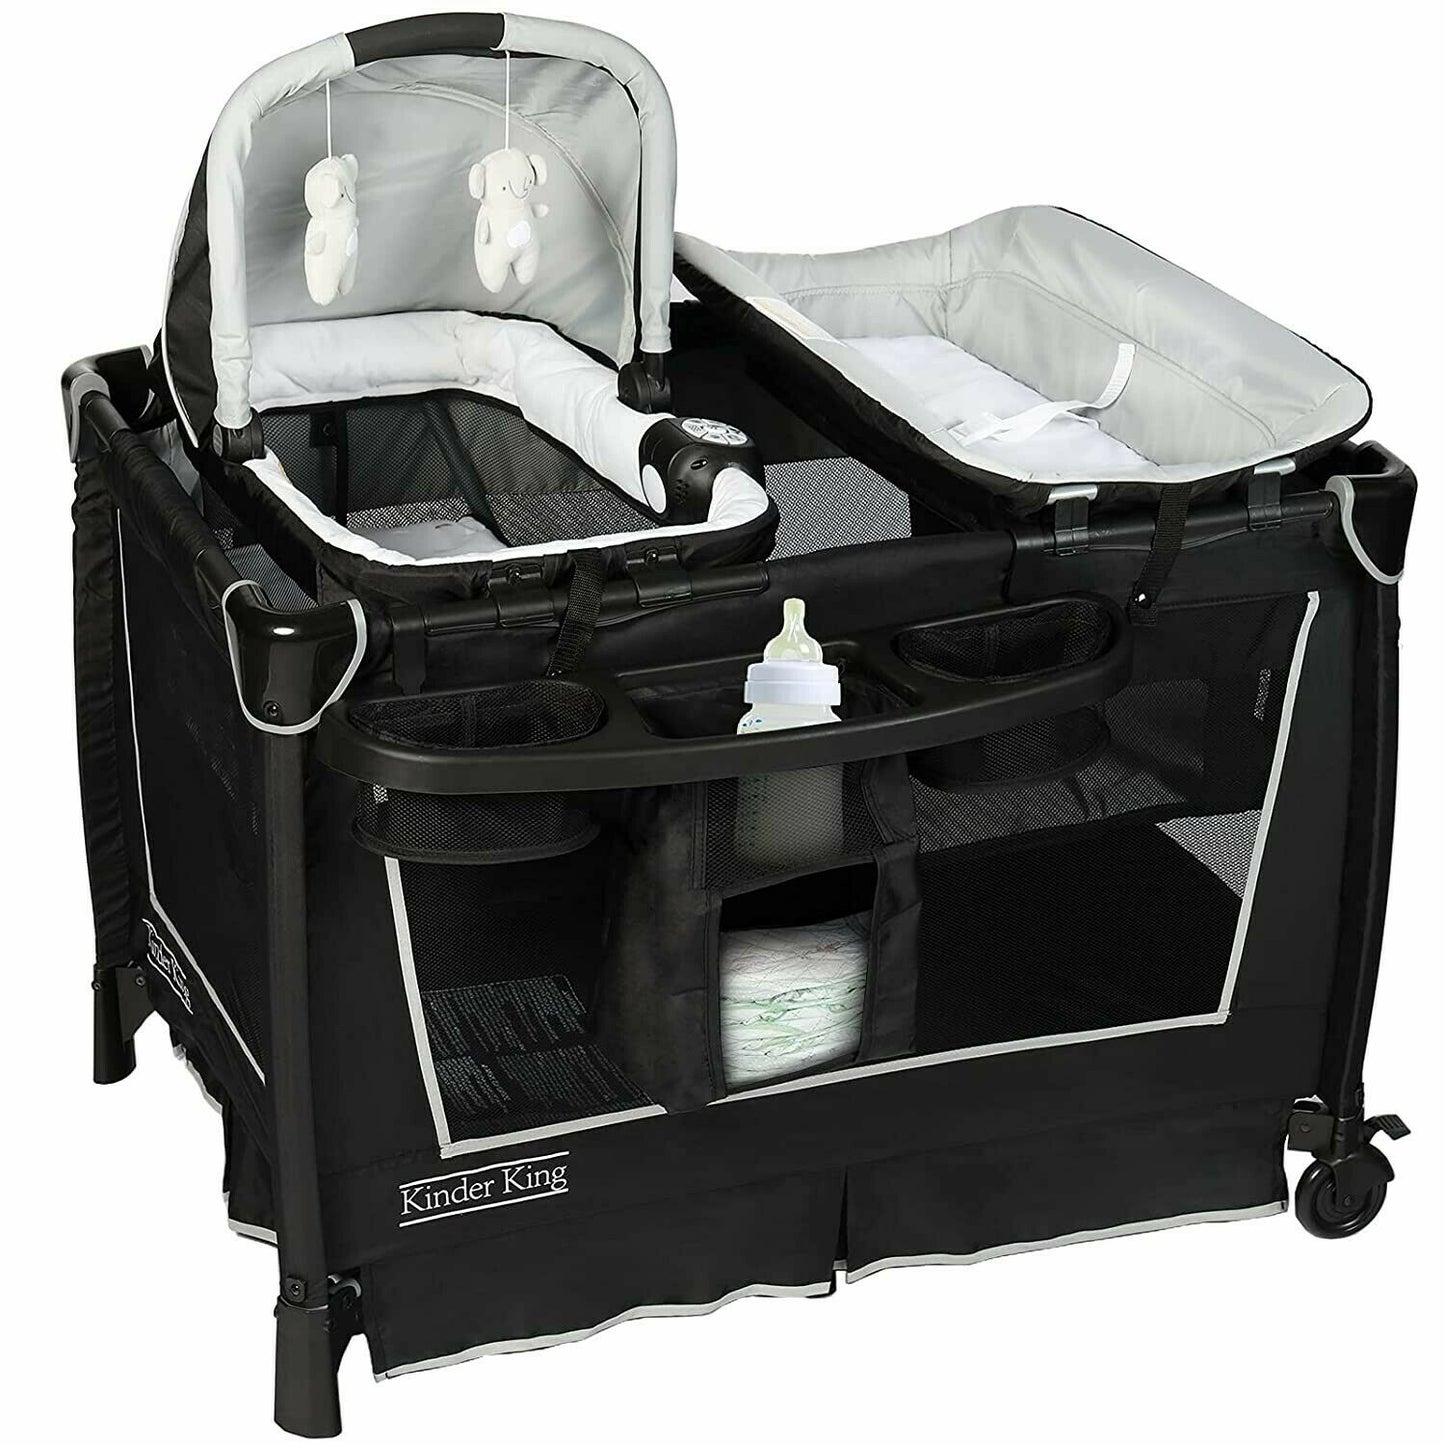 Stroller Baby Travel System with Car Seat Playard Bassinet Combo - Black